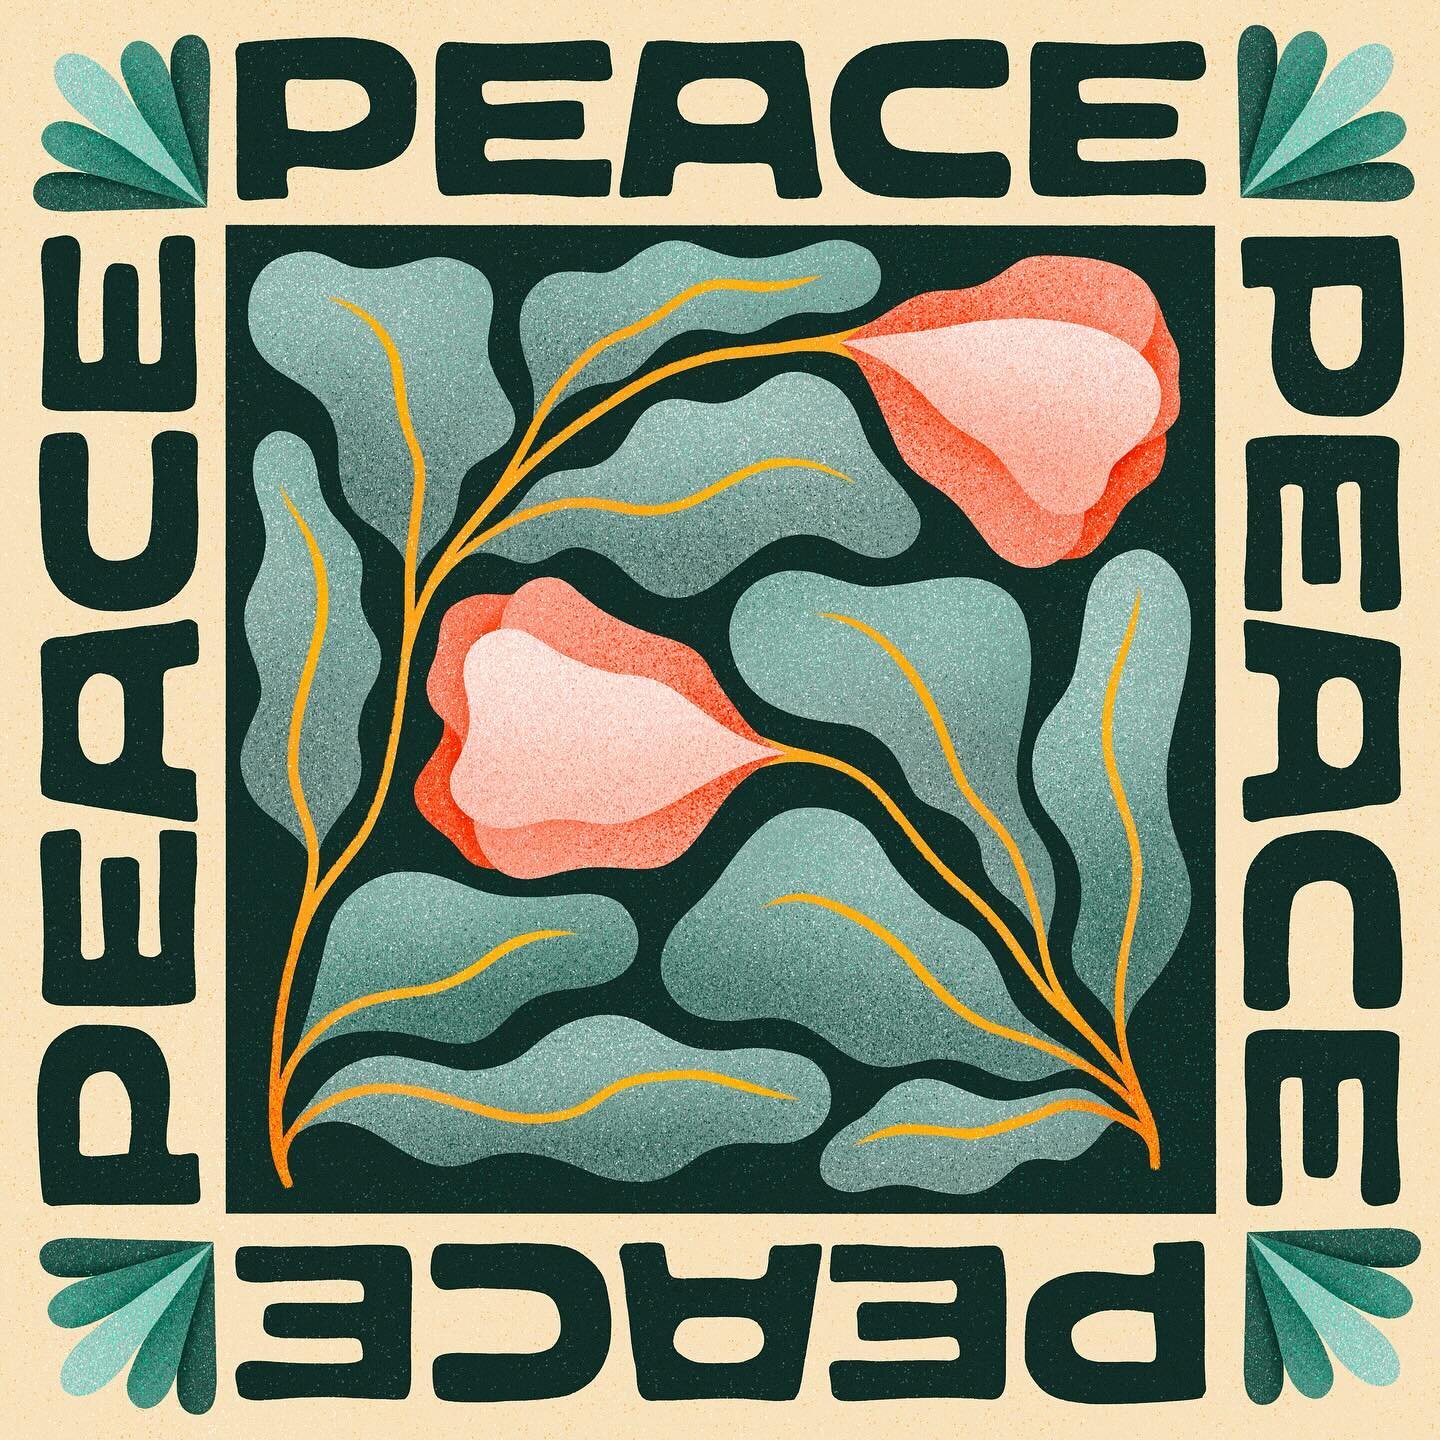 Peace and love, friends.
.
.
.
.
.
.
#illustration #handlettering #lettering #peace #drawing #type #typography #typedesign #font #design #graphicdesign #art #creative #dailytype #love #womenwhodraw #womenindesign #vancouver